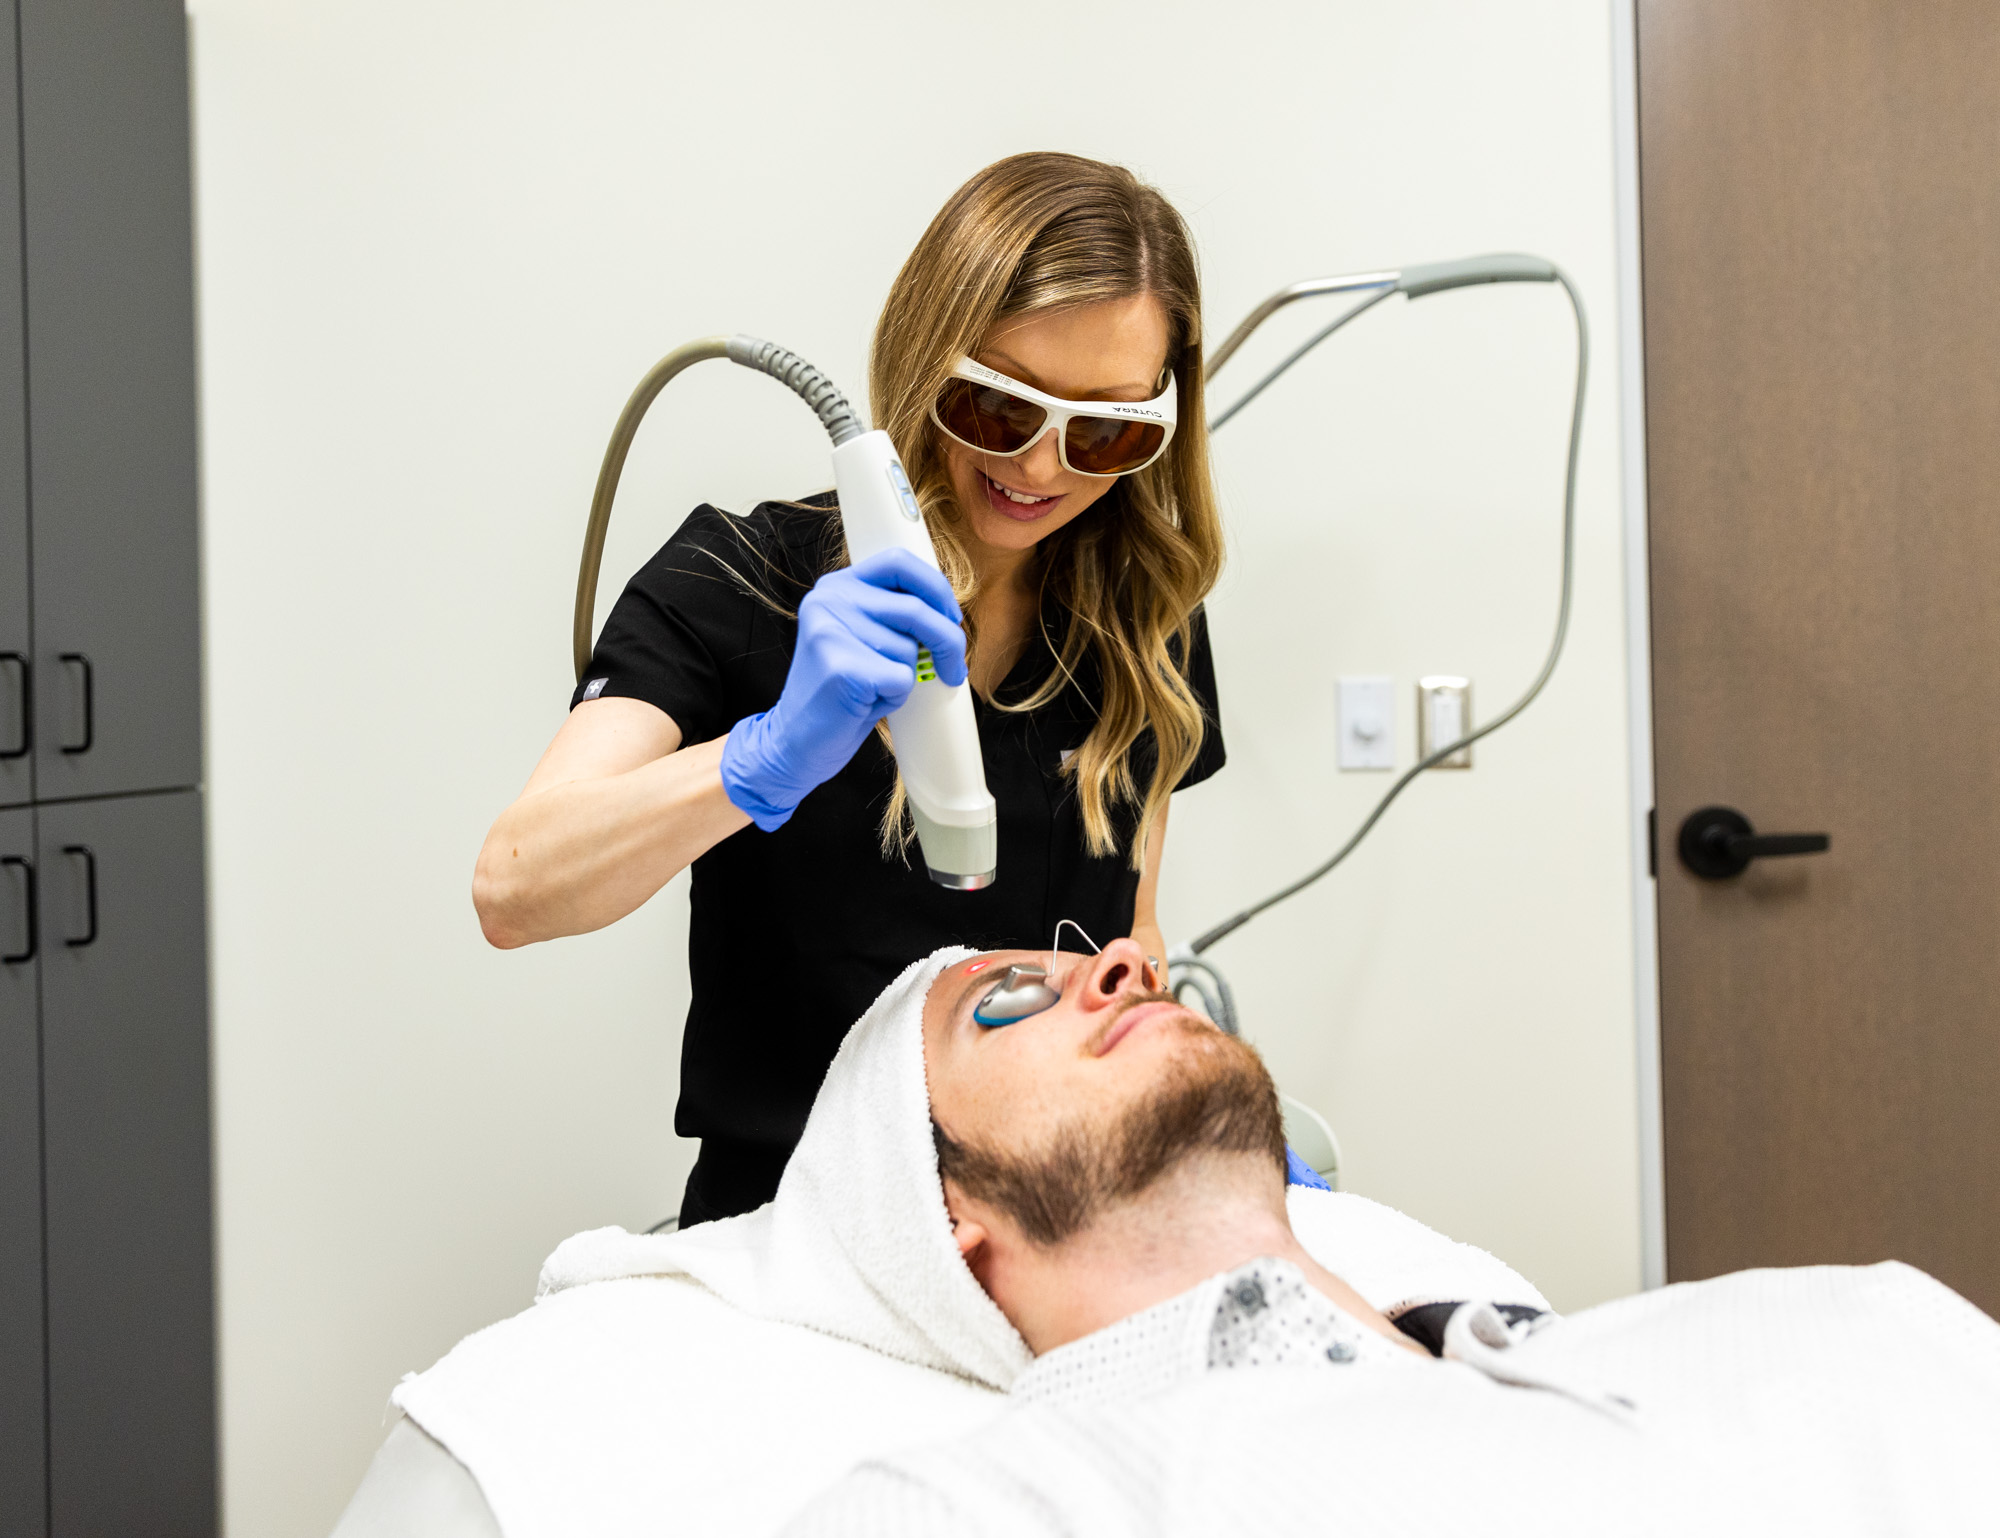 A female medical provider holds the Laser Genesis tool over a male client's forehead. He's wearing protective eye coverings and a towel over his hair. The medical provider is wearing protective sunglasses.